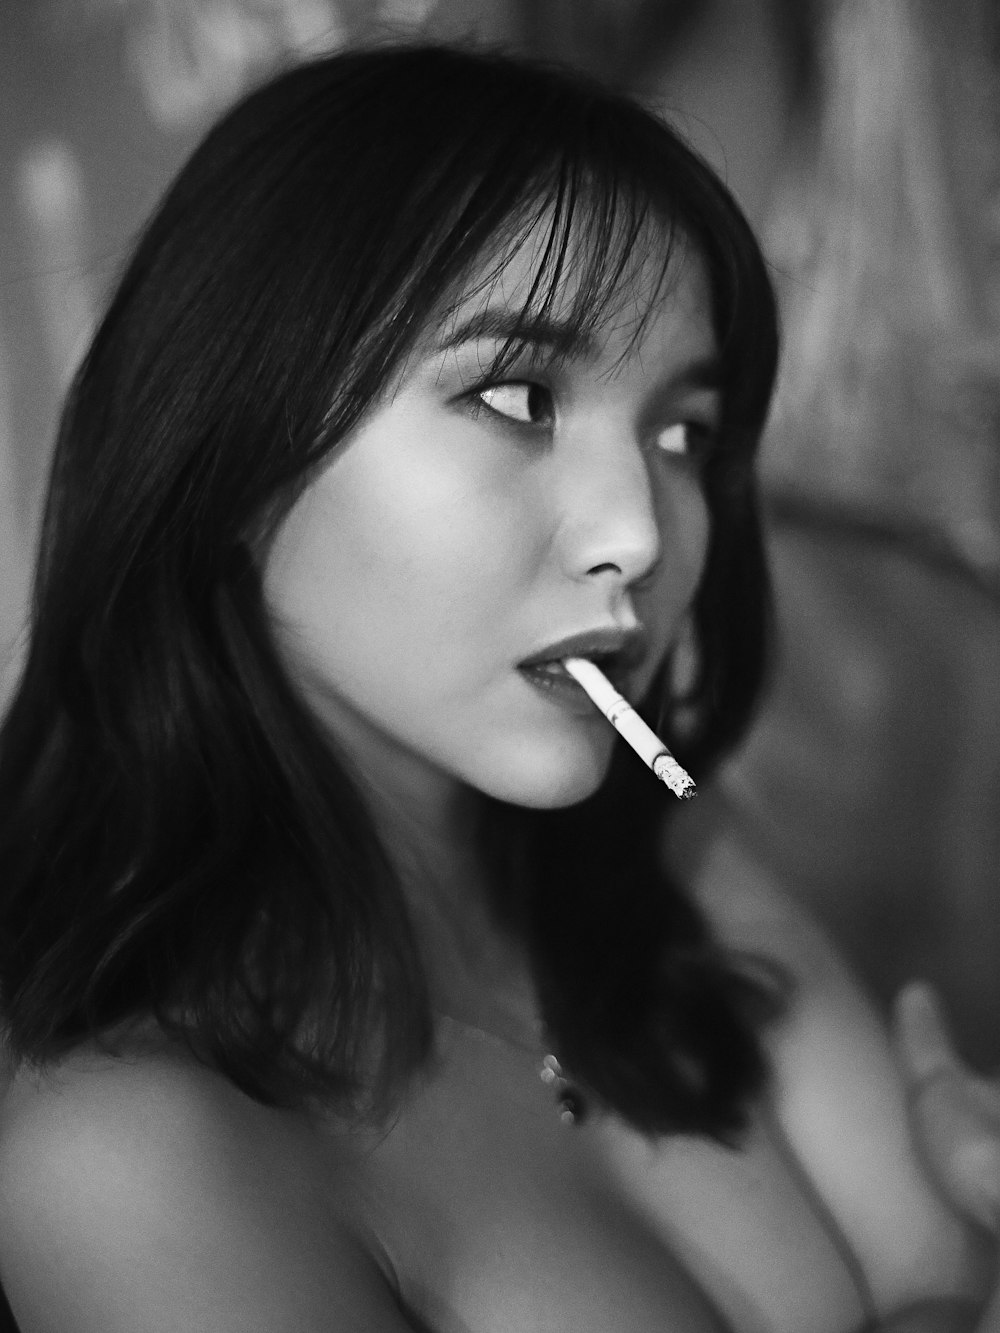 woman with cigarette on mouth